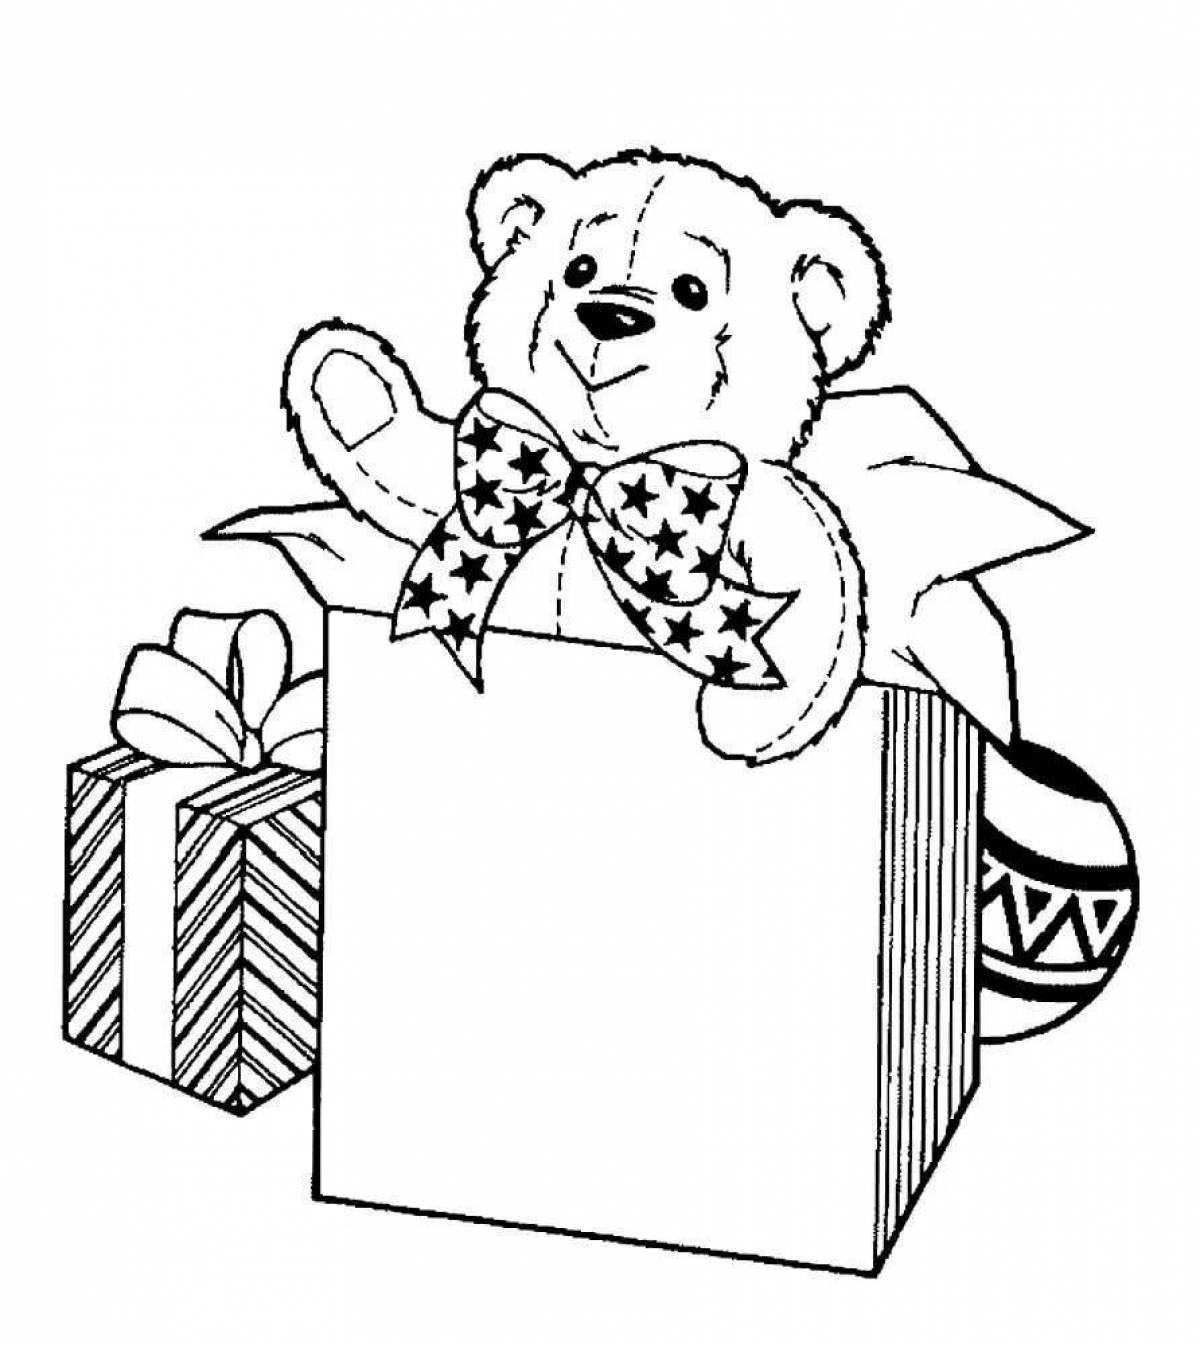 Coloring book shiny teddy bear with a gift